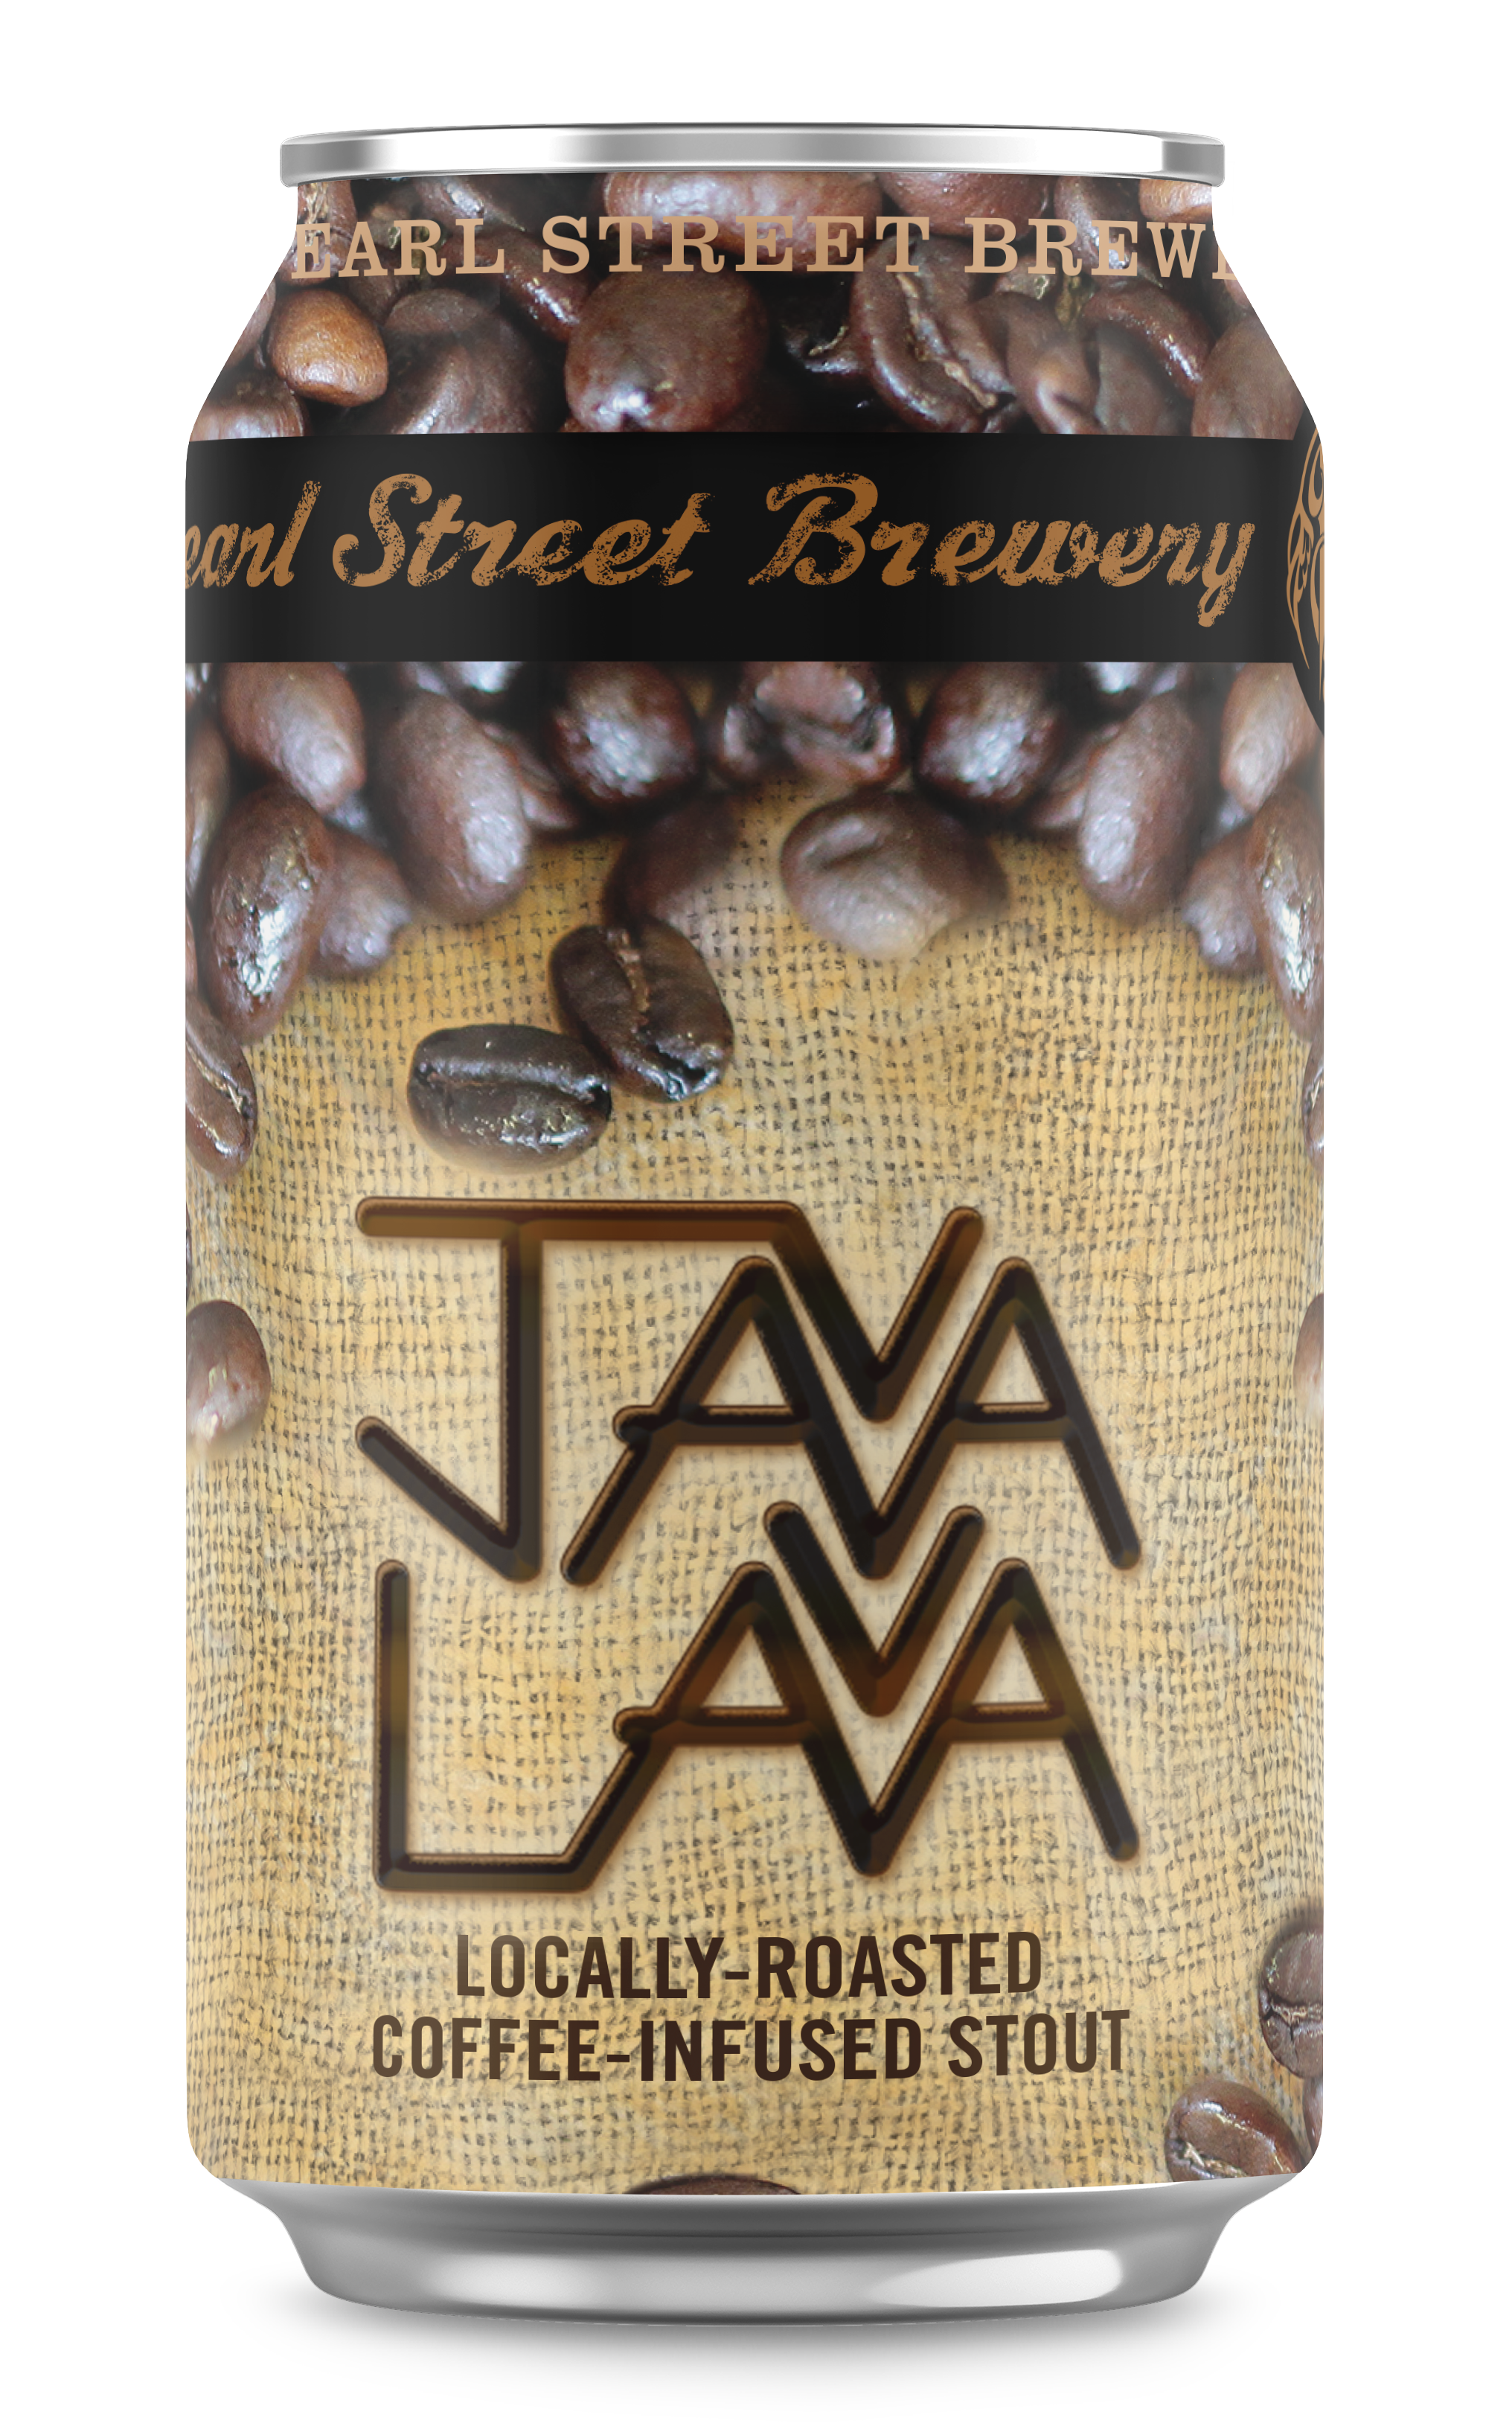   La Crosse, WI (September 2021): Pearl Street Brewery will be releasing two fan favs in cans this month. Java Lava Coffee Stout and That’s What I’m Talkin’ ’bout Organic Rolled Oat Stout. These two beers have been extremely popular on draught and in bottles for years. The ongoing transition to cans over bottles is part of Pearl Street’s ongoing commitment to sustainability.     “Cans are no more or less recyllable than bottles are; however, they are more likely to be recycled than bottles are. They also tend to provide some other benefits in keeping the beer fresher for a longer time” says Pearl Street Founder and Brewmaster Joe Katchever.     Other recently released cans include Rumpshaker IPA, Linalool IPA, the brewery's famous D.T.B Brown Ale, V|O Haze,  Supreme Fatty, and their popular traditional light lager, Shitty Lyte Beer.      That’s What I’m Talkin’ ’bout Organic Rolled Oat Stout  This Rolled Oat Stout is a full-bodied black ale, inspired by the industrial rail systems that plows through Wisconsin. It’s chock full of organic rolled oats, chocolate and black malts and a variety of hops. And even with all that, it won’t weigh you down at 5.5% ABV  14 IBUs     Java Lava Coffee Stout  Java Lava is dark and delicious! This stout is brewed with an infusion of fresh,  locally roasted Guatemalan coffee beans from our friends at Bean Juice coffee roasters. The dark beans are steeped in a rich, chocolaty stout until optimum flavor has been reached. You’ll find fresh coffee aroma with roasty, toasty undertones. The buzz is, it’s great! 5.5% ABV  14 IBUs     About Pearl Street Brewery   Pearl Street Brewery has been creating award-winning craft beers in La Crosse, WI for 21 years.  Their beer can be found in restaurants, bars, and retailers all over Wisconsin, Iowa, and Minnesota.  The Tasting Room is open for beer lovers from Tuesday through Sunday.  The brewery hosts many community events and is very involved in local charity work.     Media Contact:     Tami Plourde  Owner / Director Sales and Marketing  Pearl Street Brewery  tami@pearlstreetbrewery.com  1401 Saint Andrew Street   La Crosse, WI 54603  608-784-4832 Ext 6 Java Lava Coffee Stout and That’s What I’m Talkin’ ’bout Organic Rolled Oat Stout